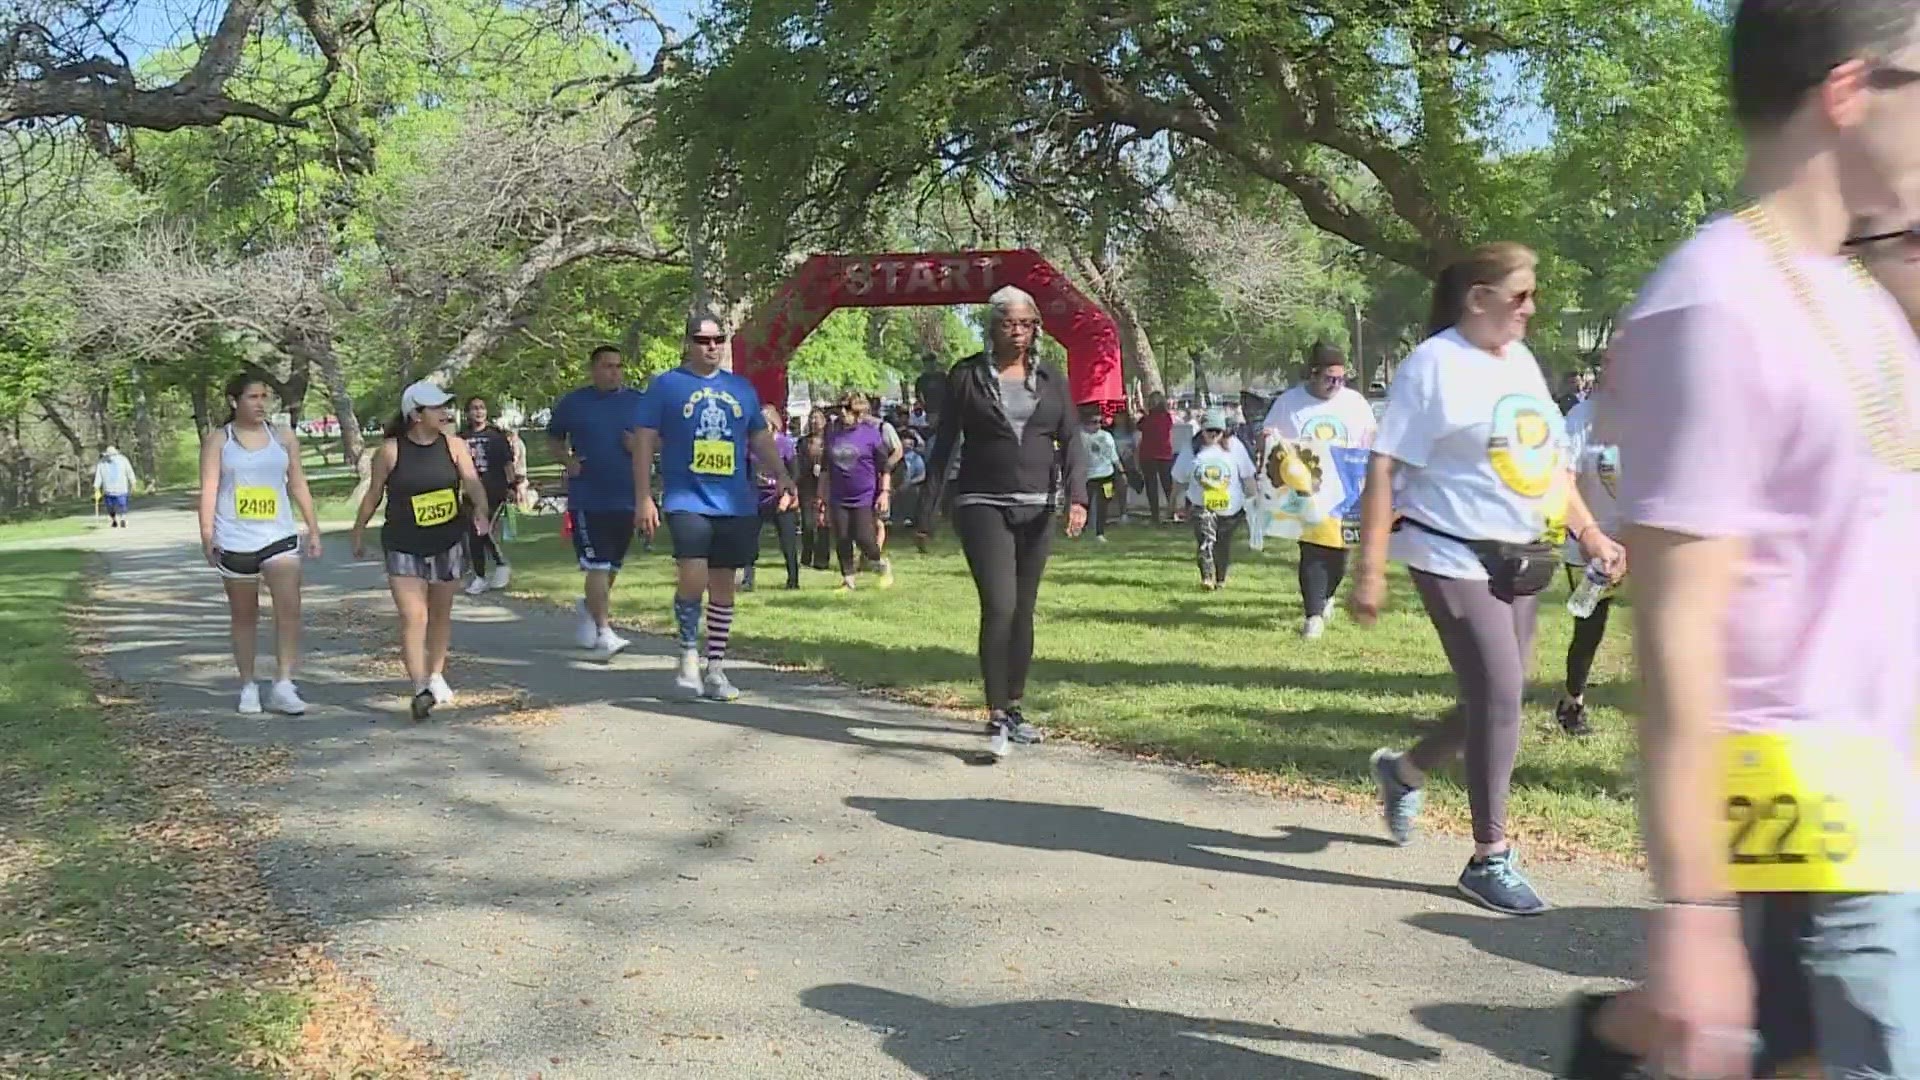 The 10th annual Stride for Sight 5k was held at Comanche County Park on the southwest side.